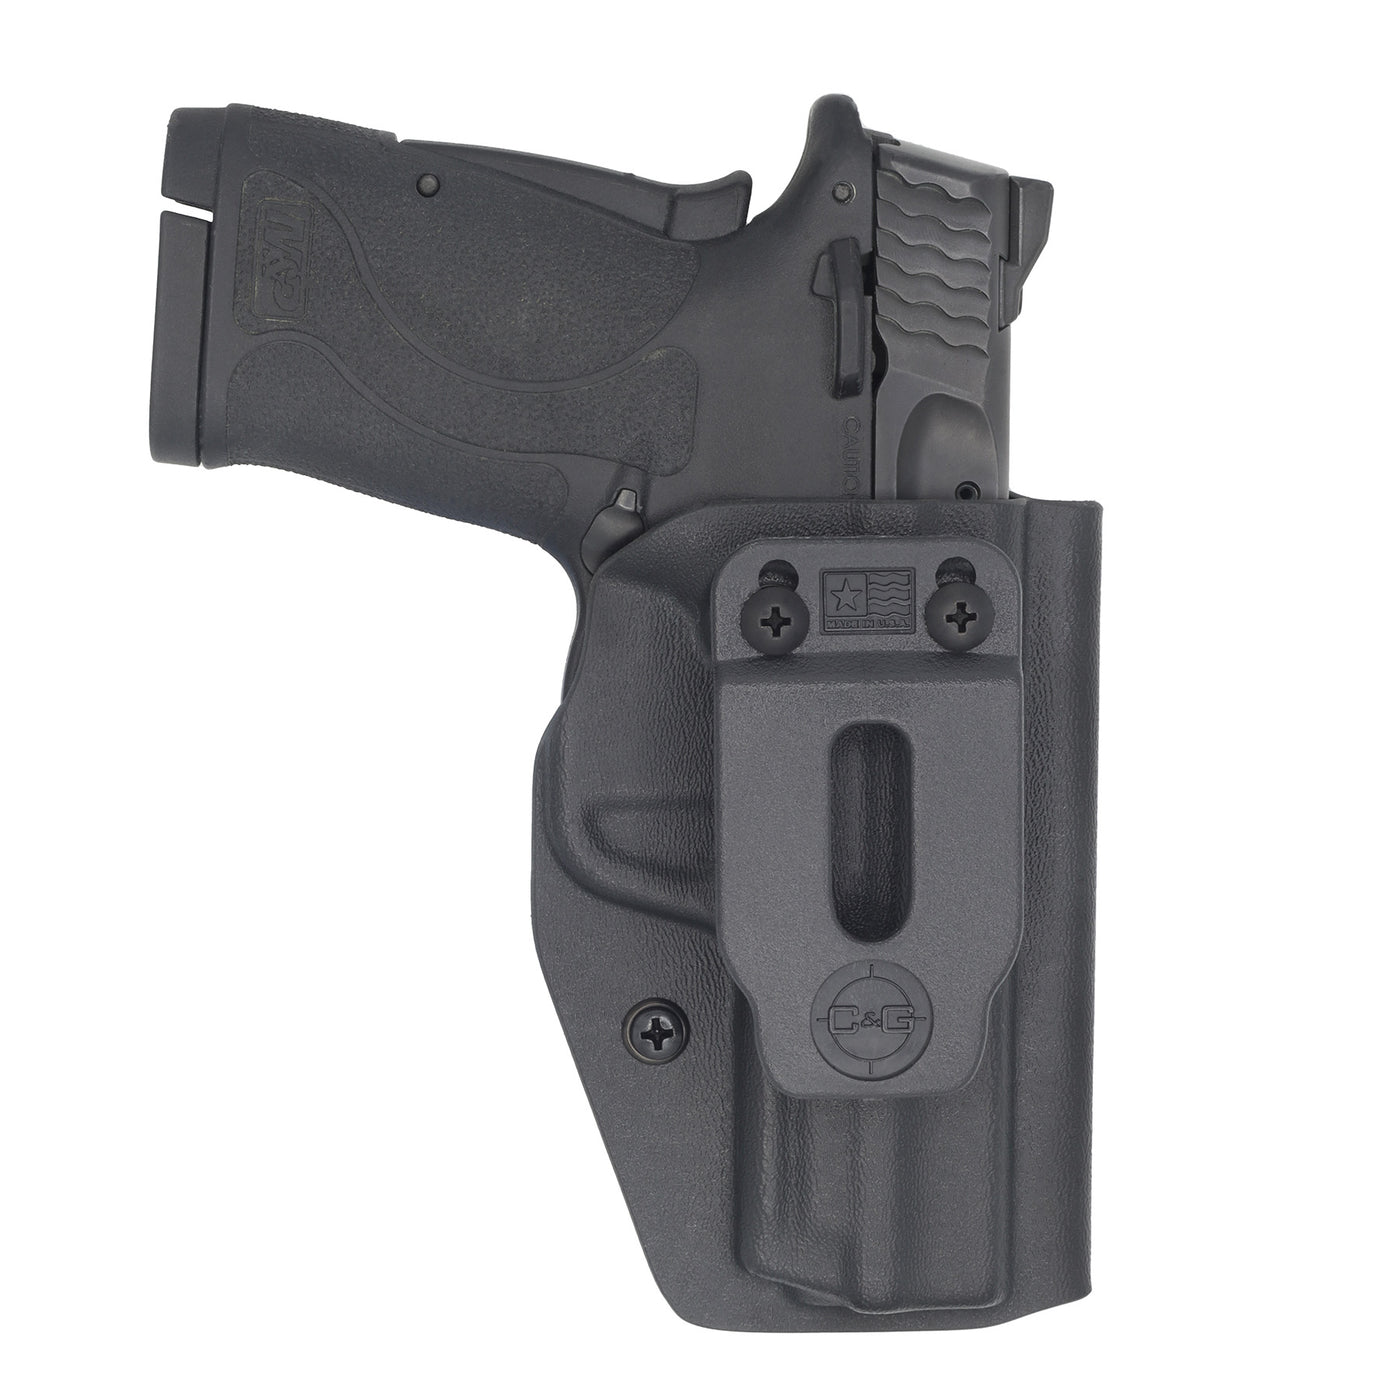 C&G Holsters IWB inside the waistband Holster for the Smith & Wesson M&P Shield EZ in holstered position